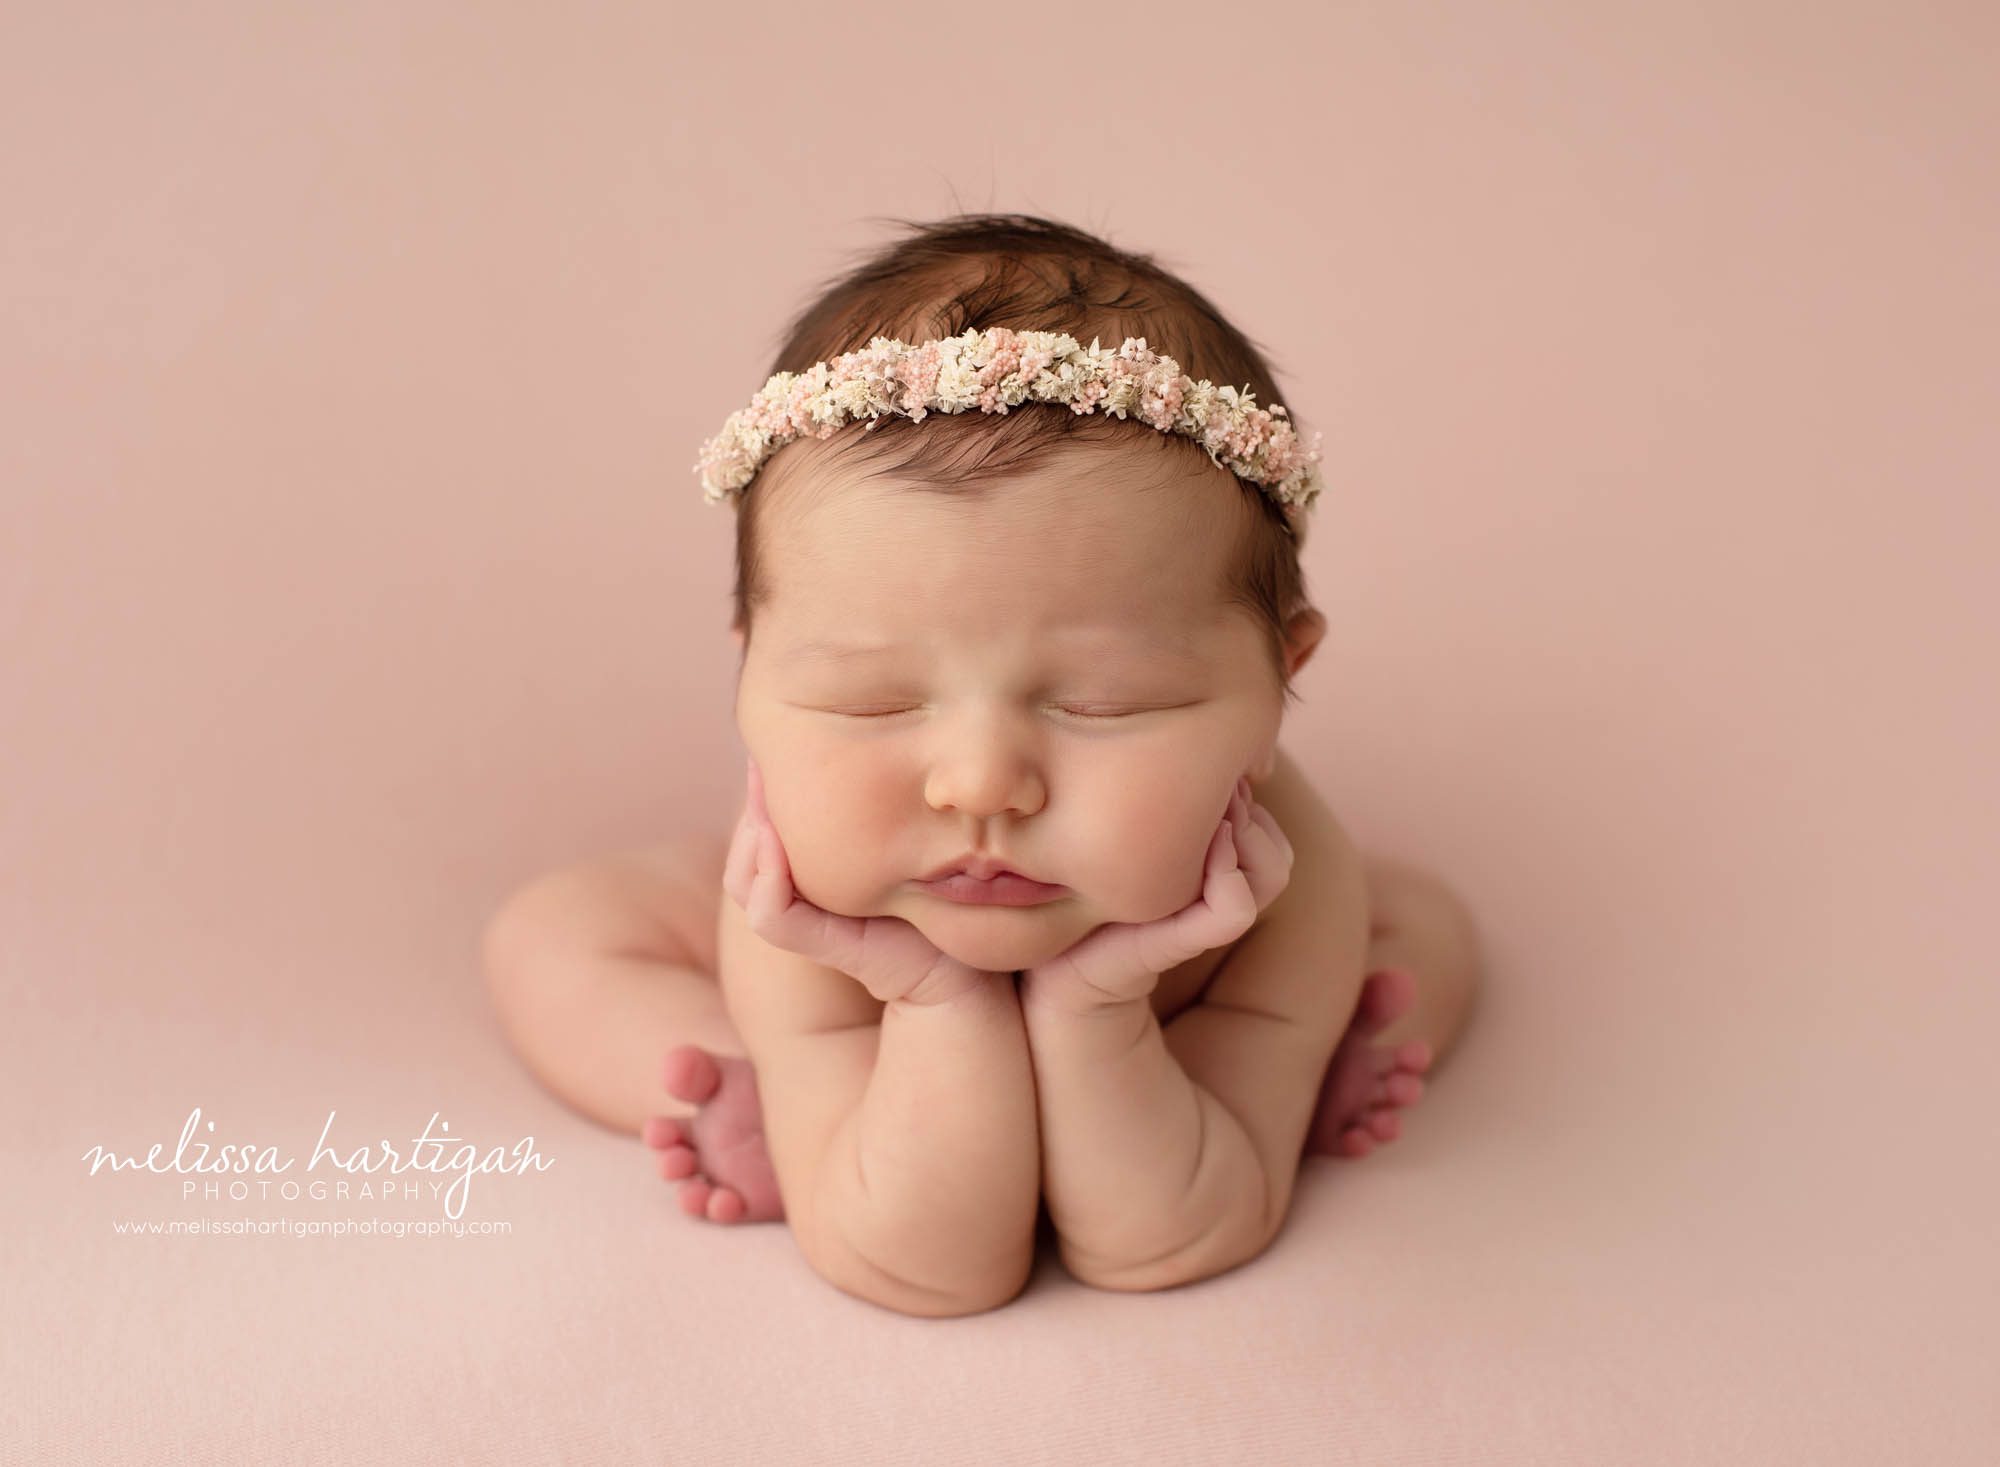 Baby girl posed forggy pose on pink backdrop in newborn photography session